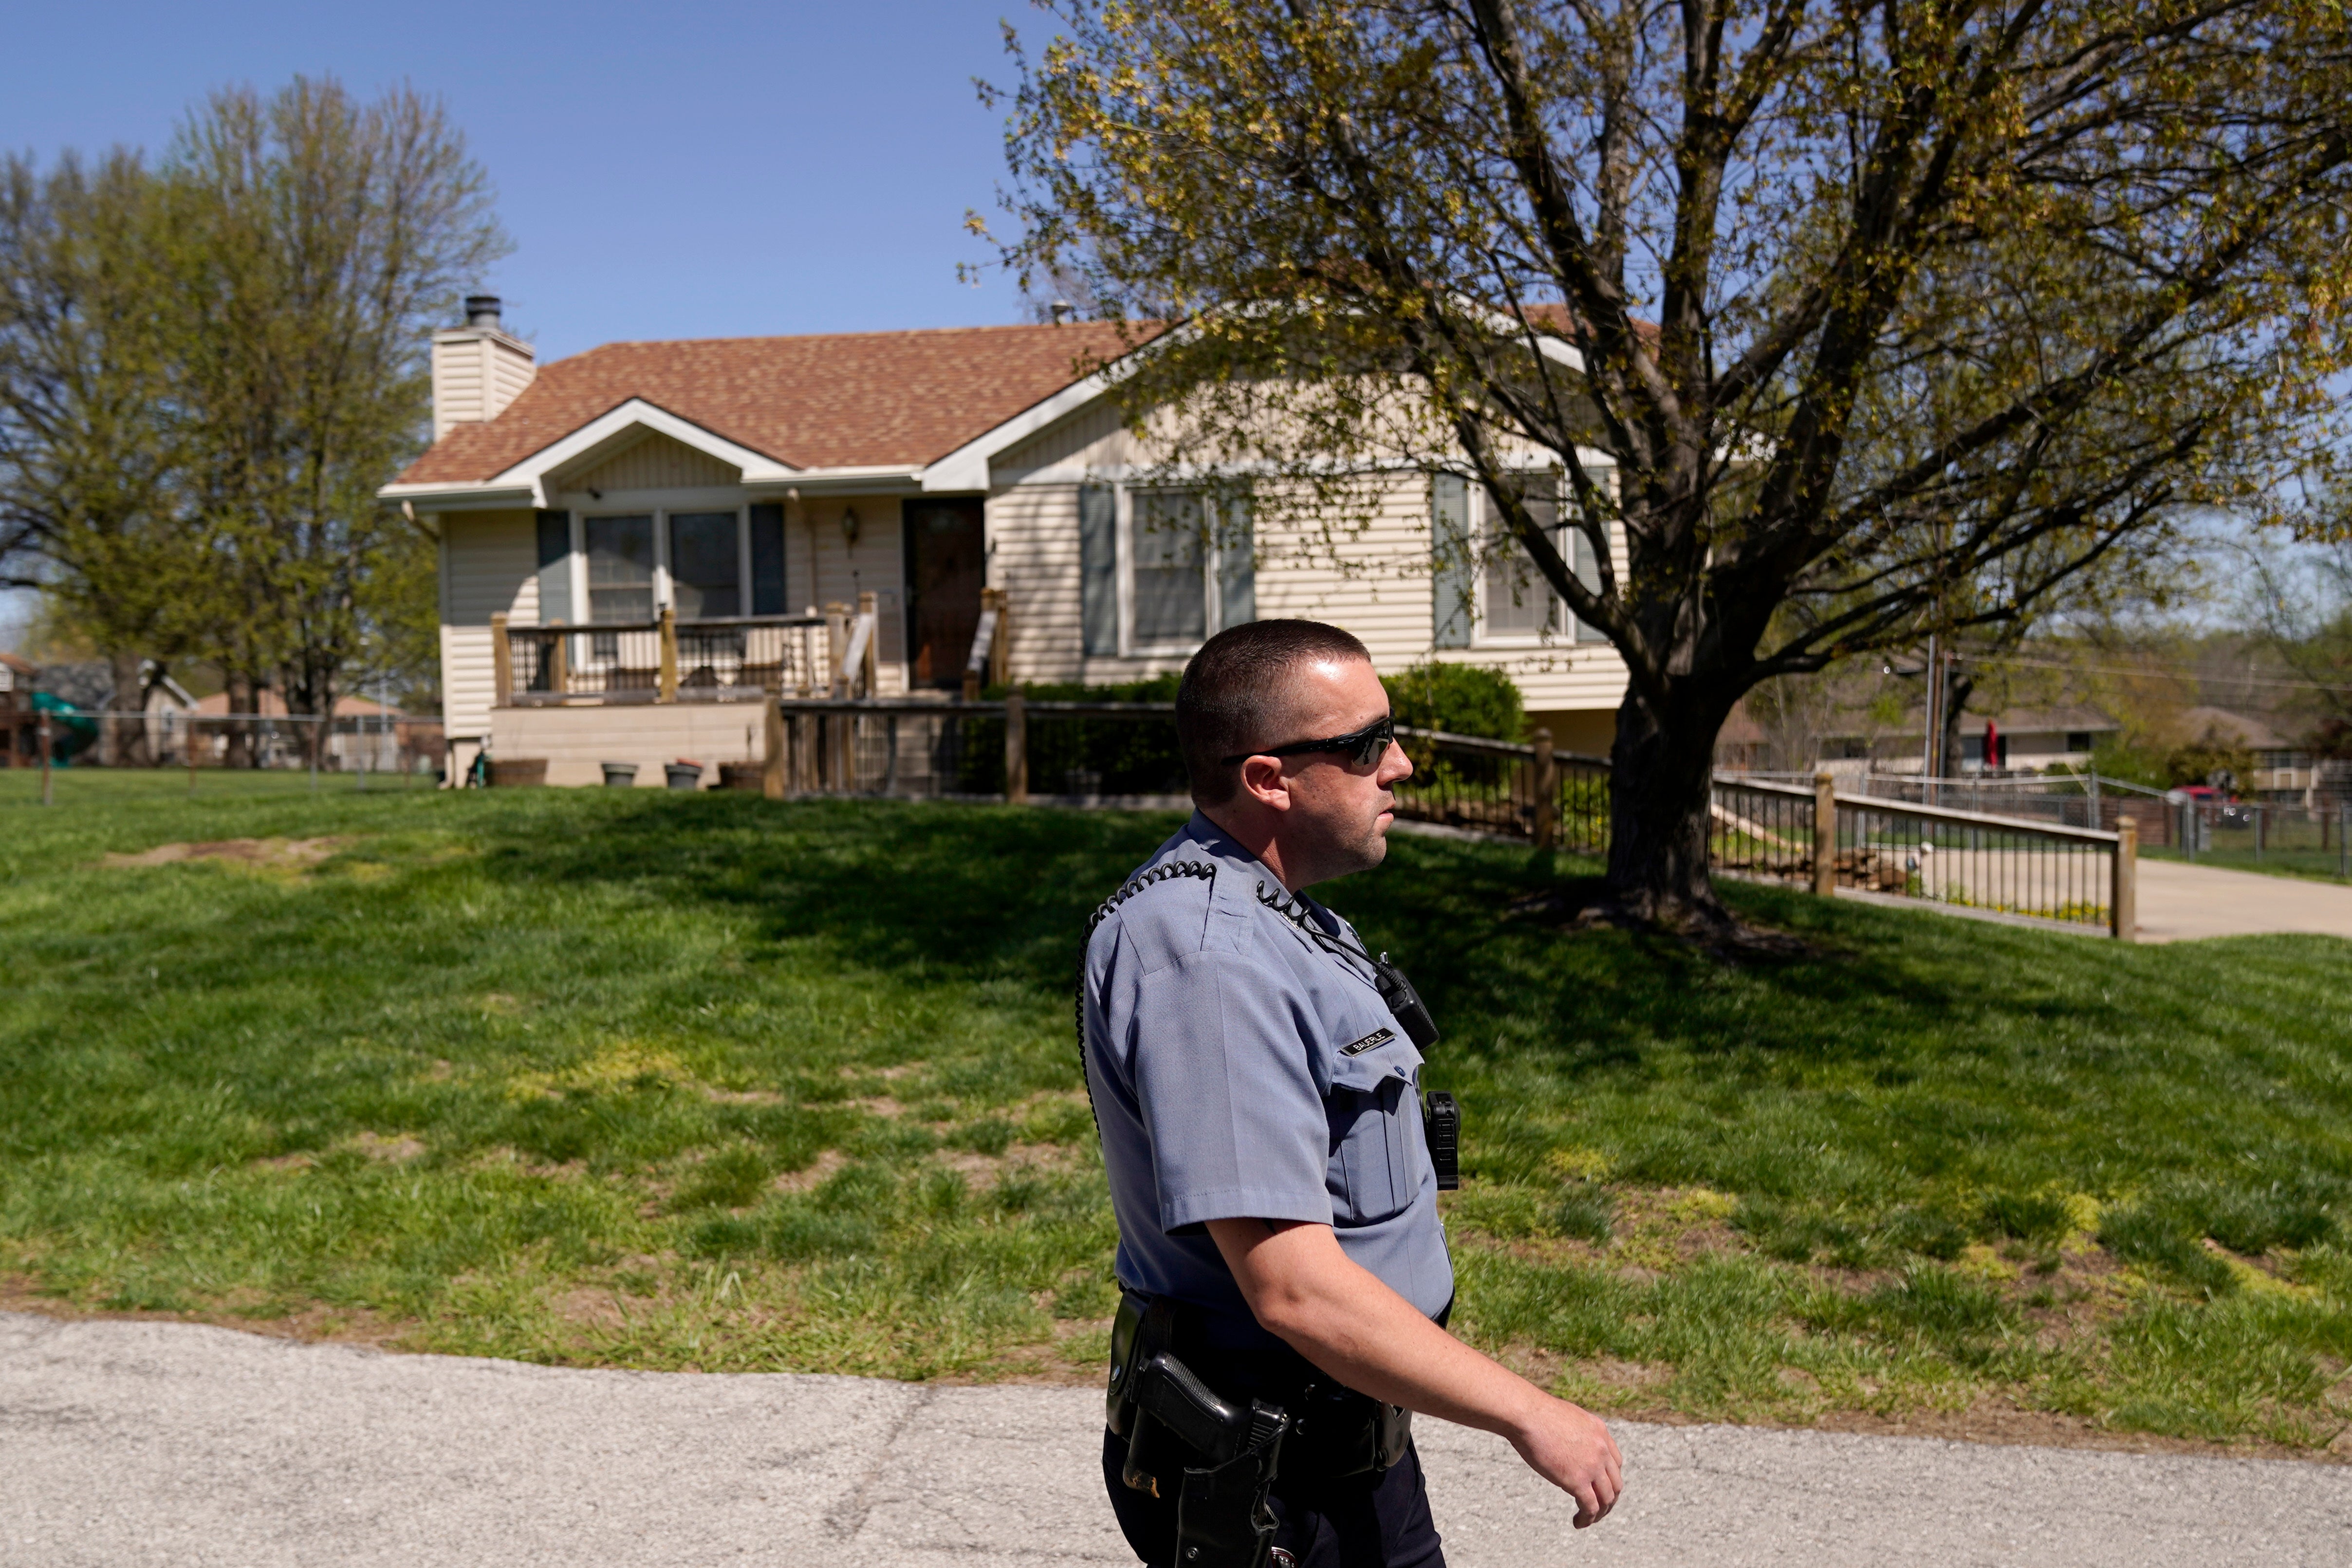 A police officer walks past Andrew Lester’s home